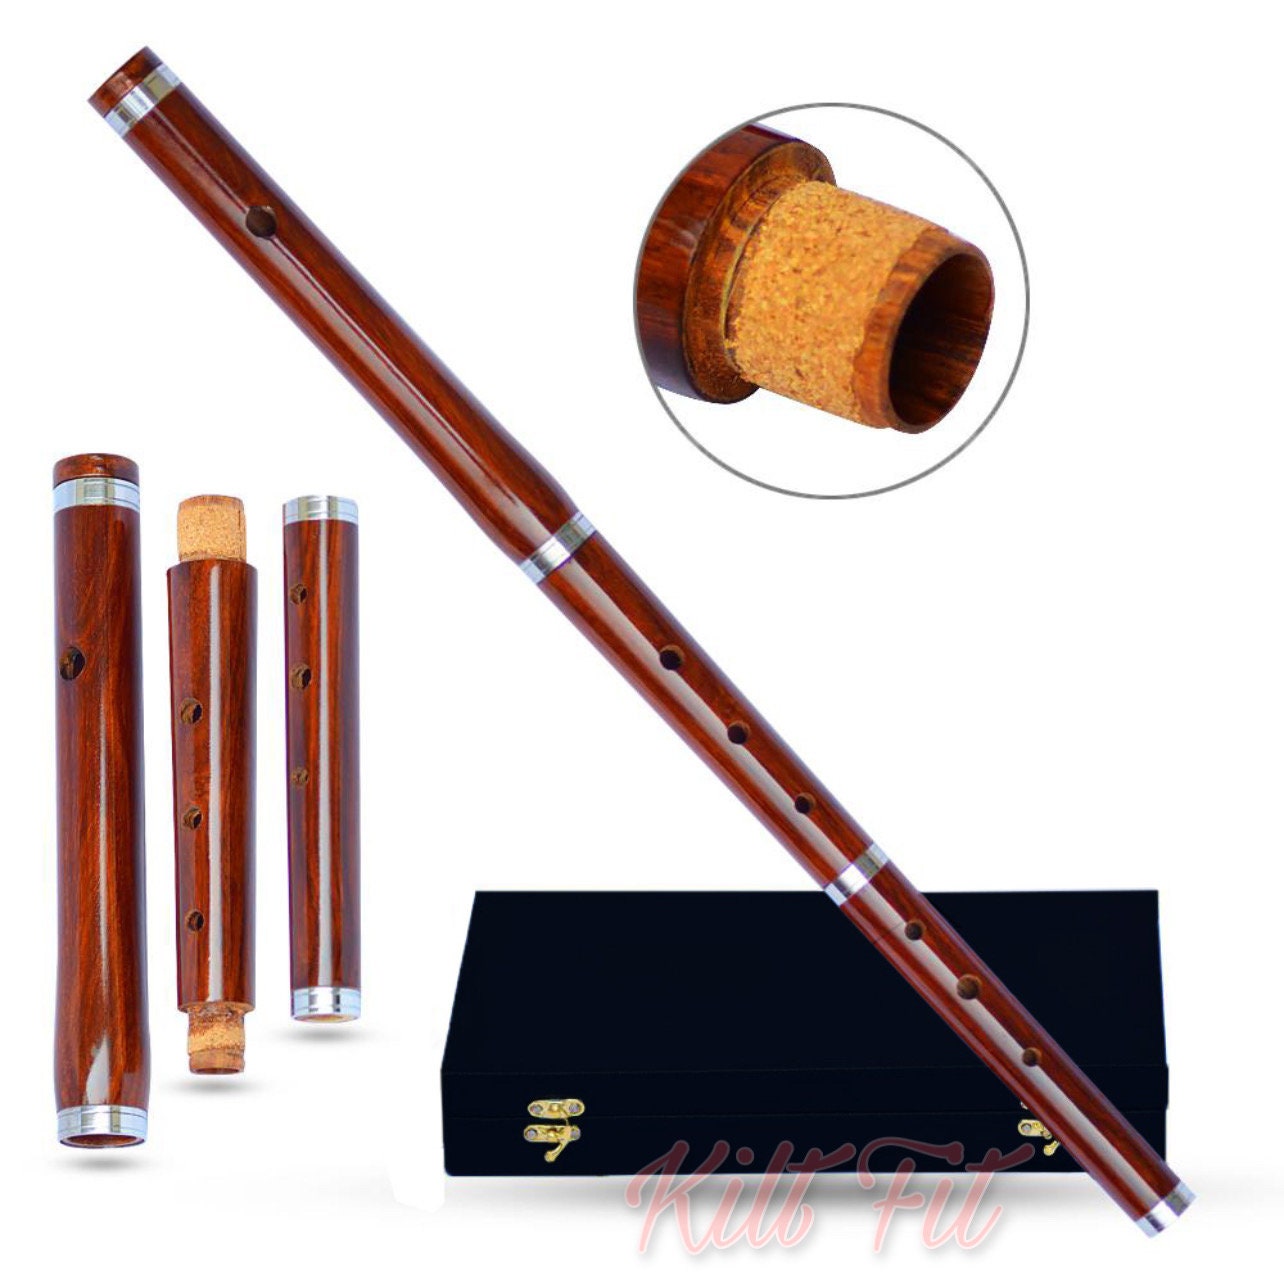 Brand New Irish Professional Tunable D Flute with Hard Case 23" Length 3 Pcs 